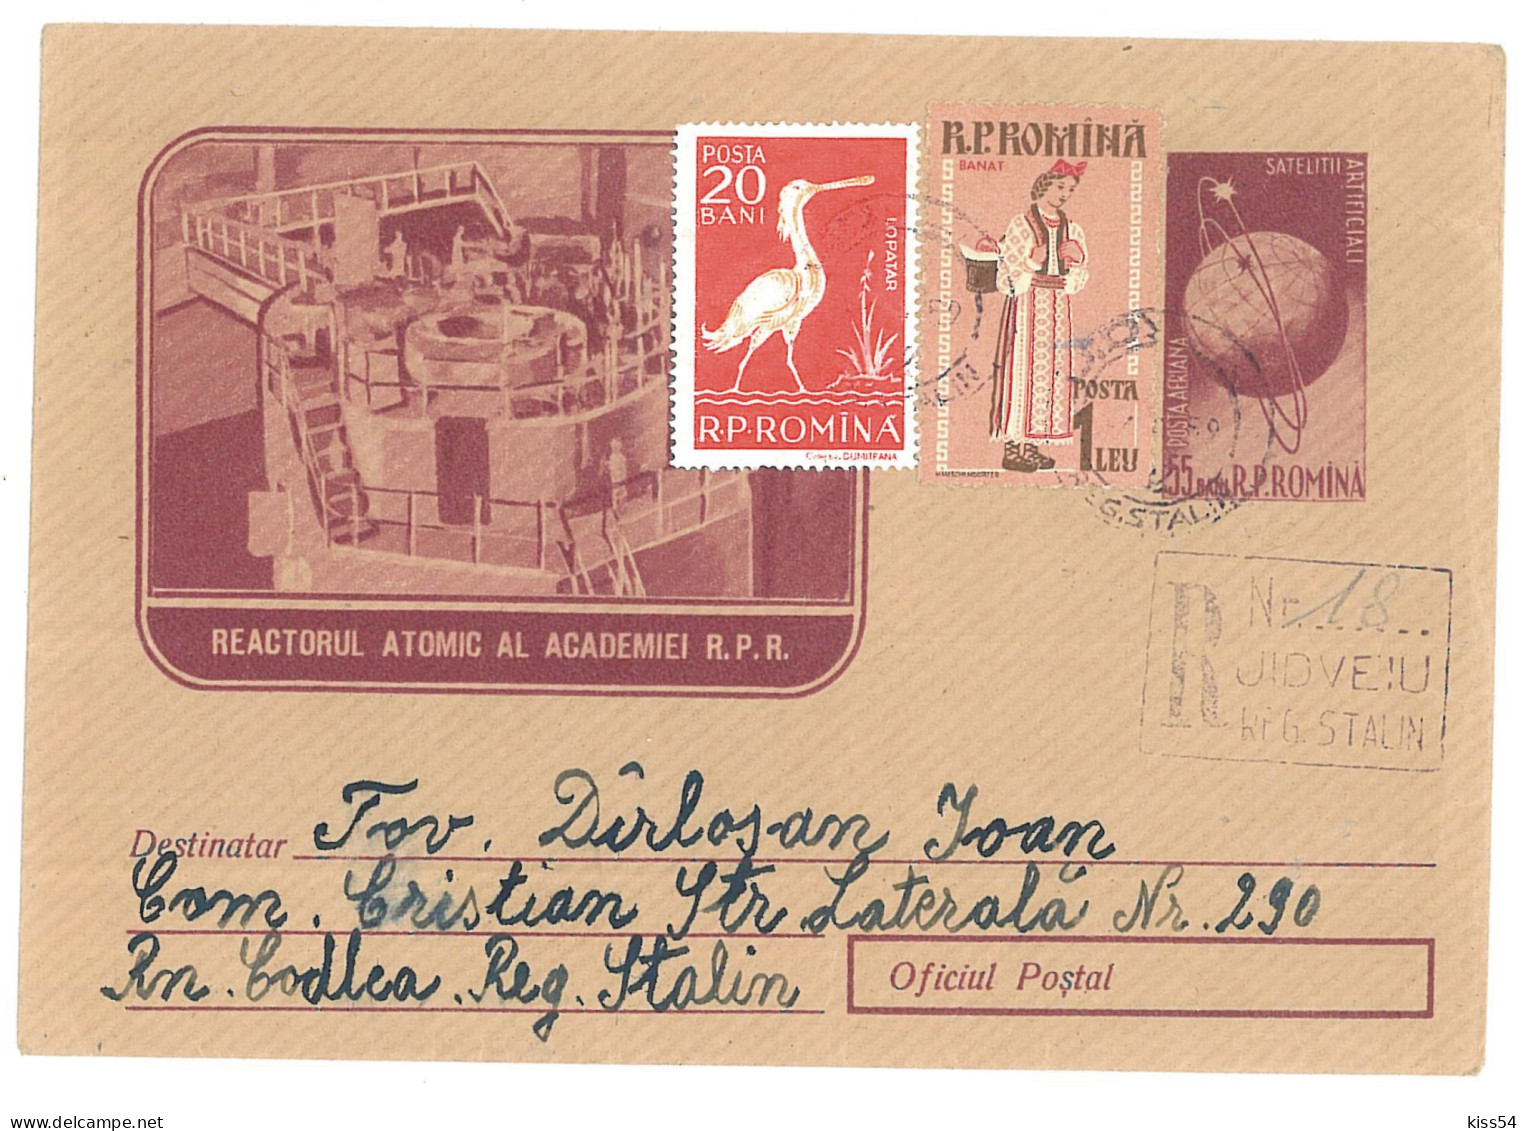 IP 58 A - 0119d-b ENERGY, Atomic Reactor, Romania - REGISTERED Stationery - Used - 1958 - Atom